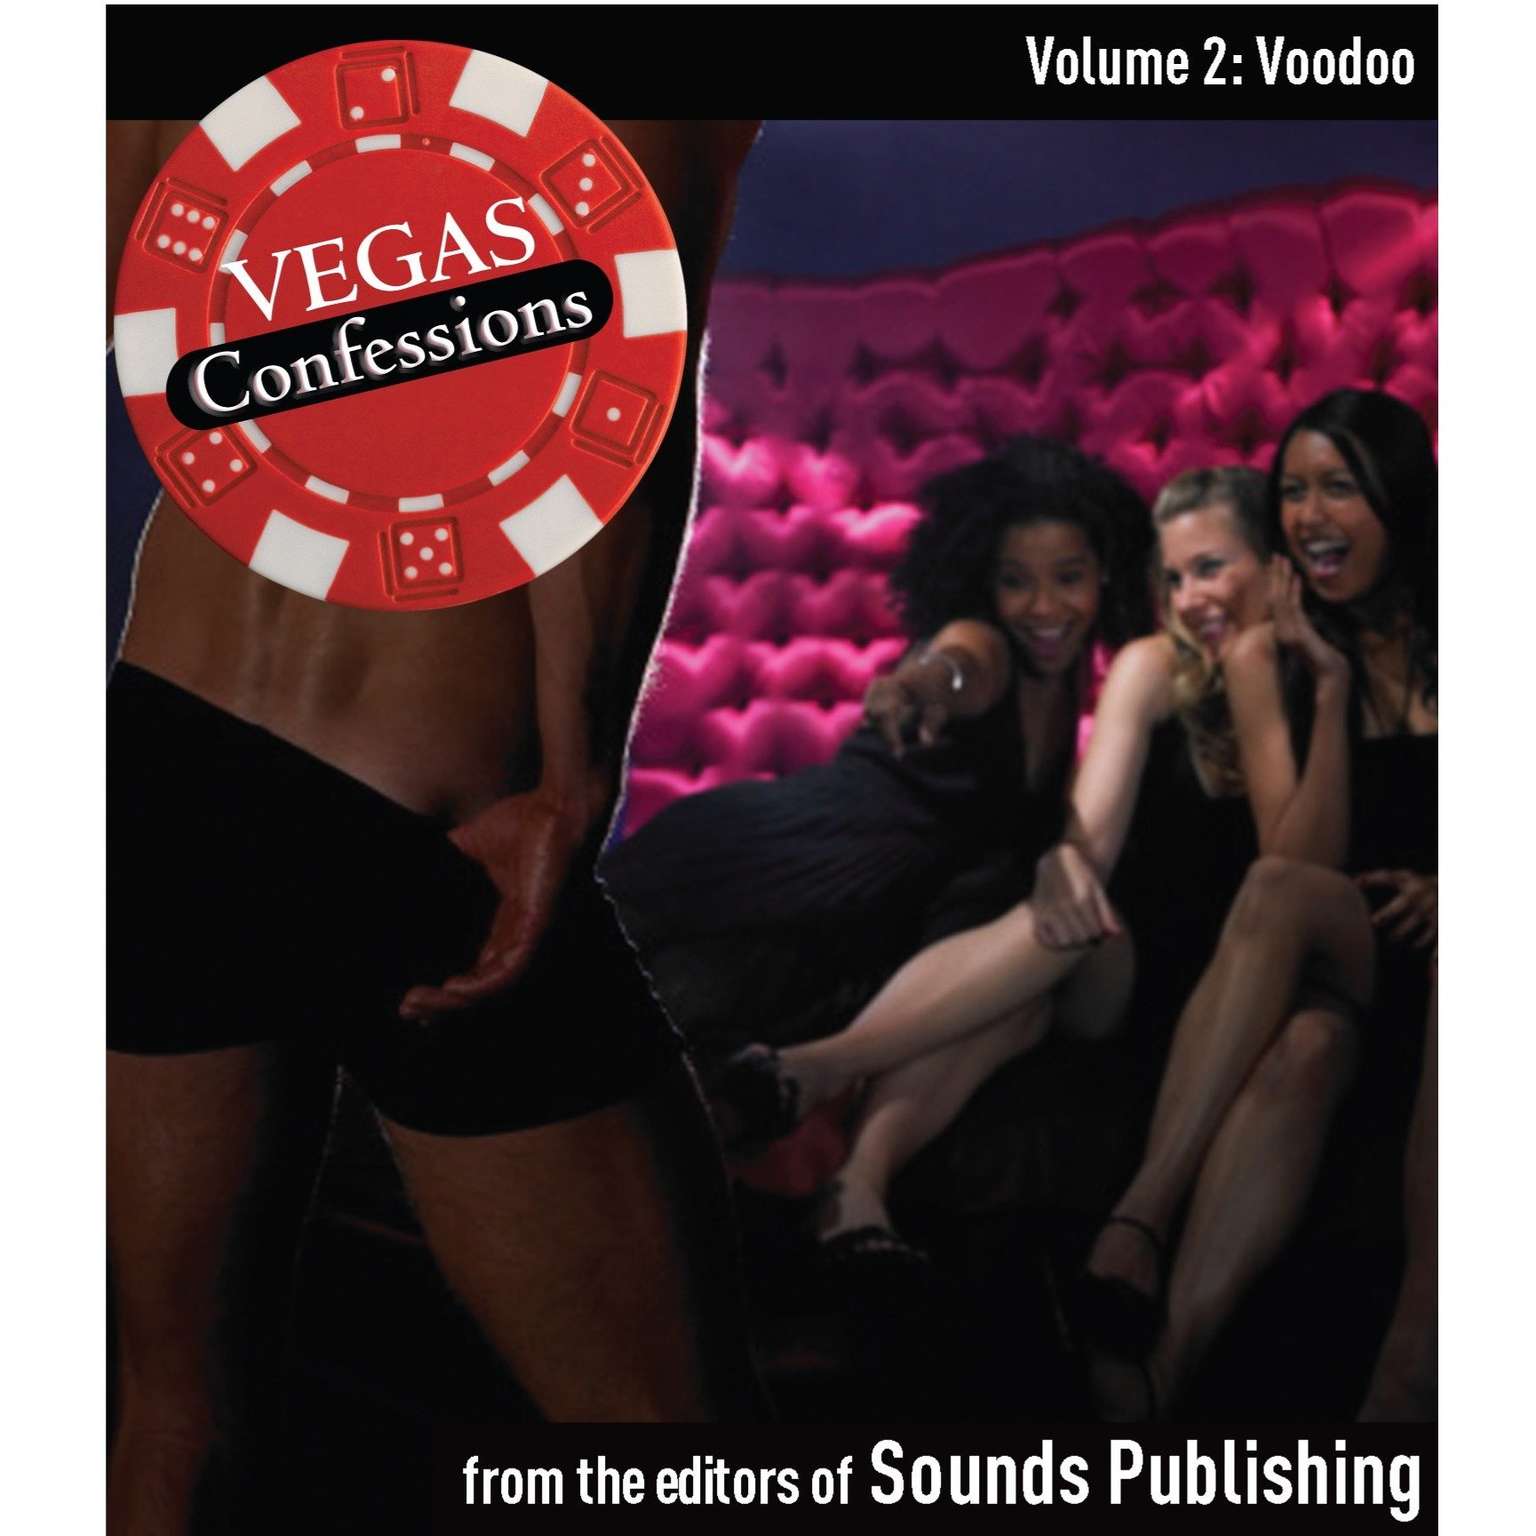 Vegas Confessions 2: Voodoo Audiobook, by The Editors of Sounds Publishing